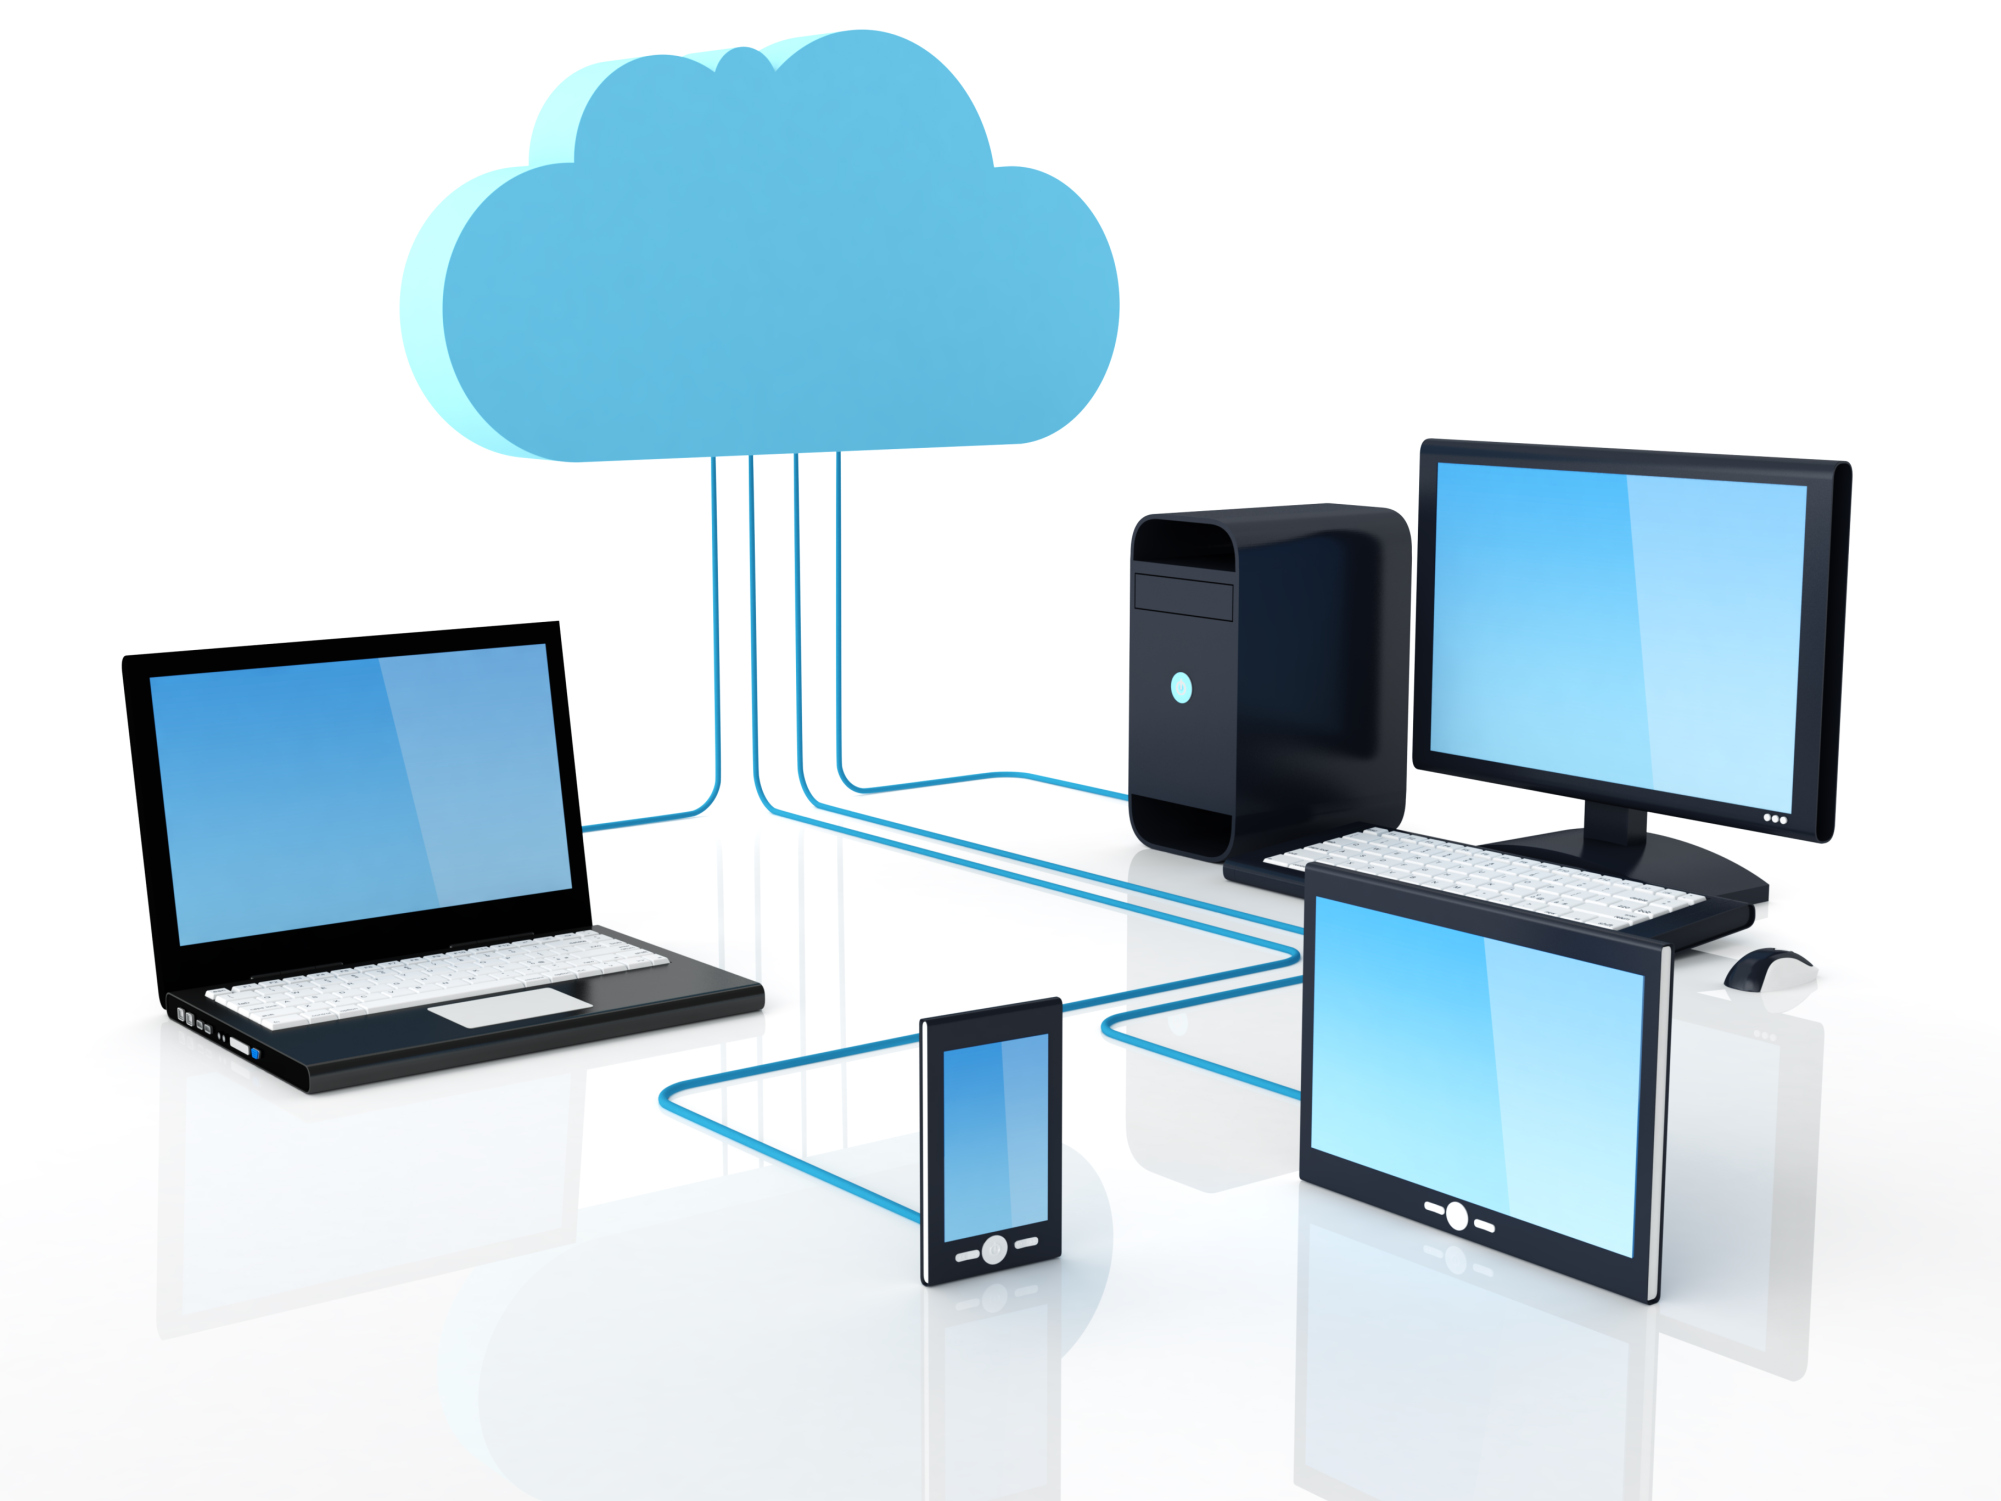 1000+ images about Cloud Computing | Technology, A ...